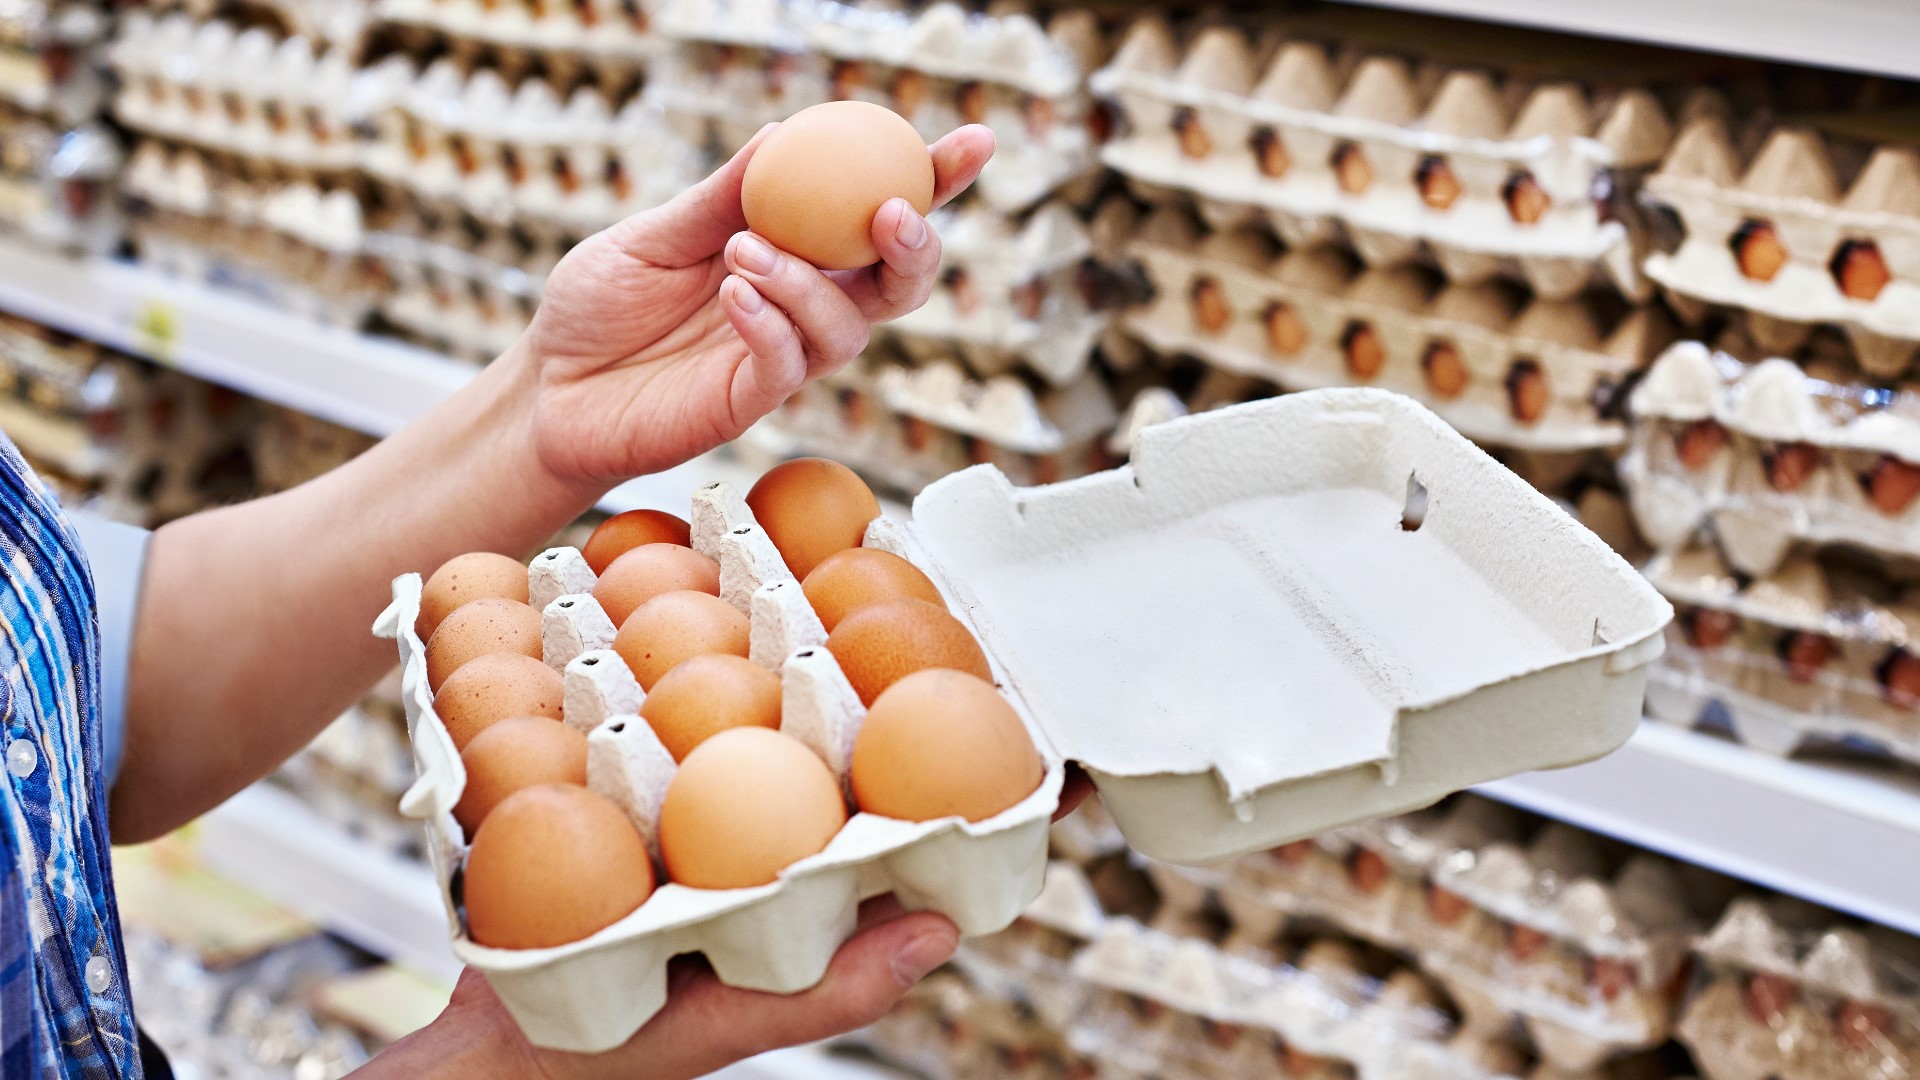 Becky Krystal, of Voraciously at Washington Post Food, discusses some egg substitutes for baking and cooking.